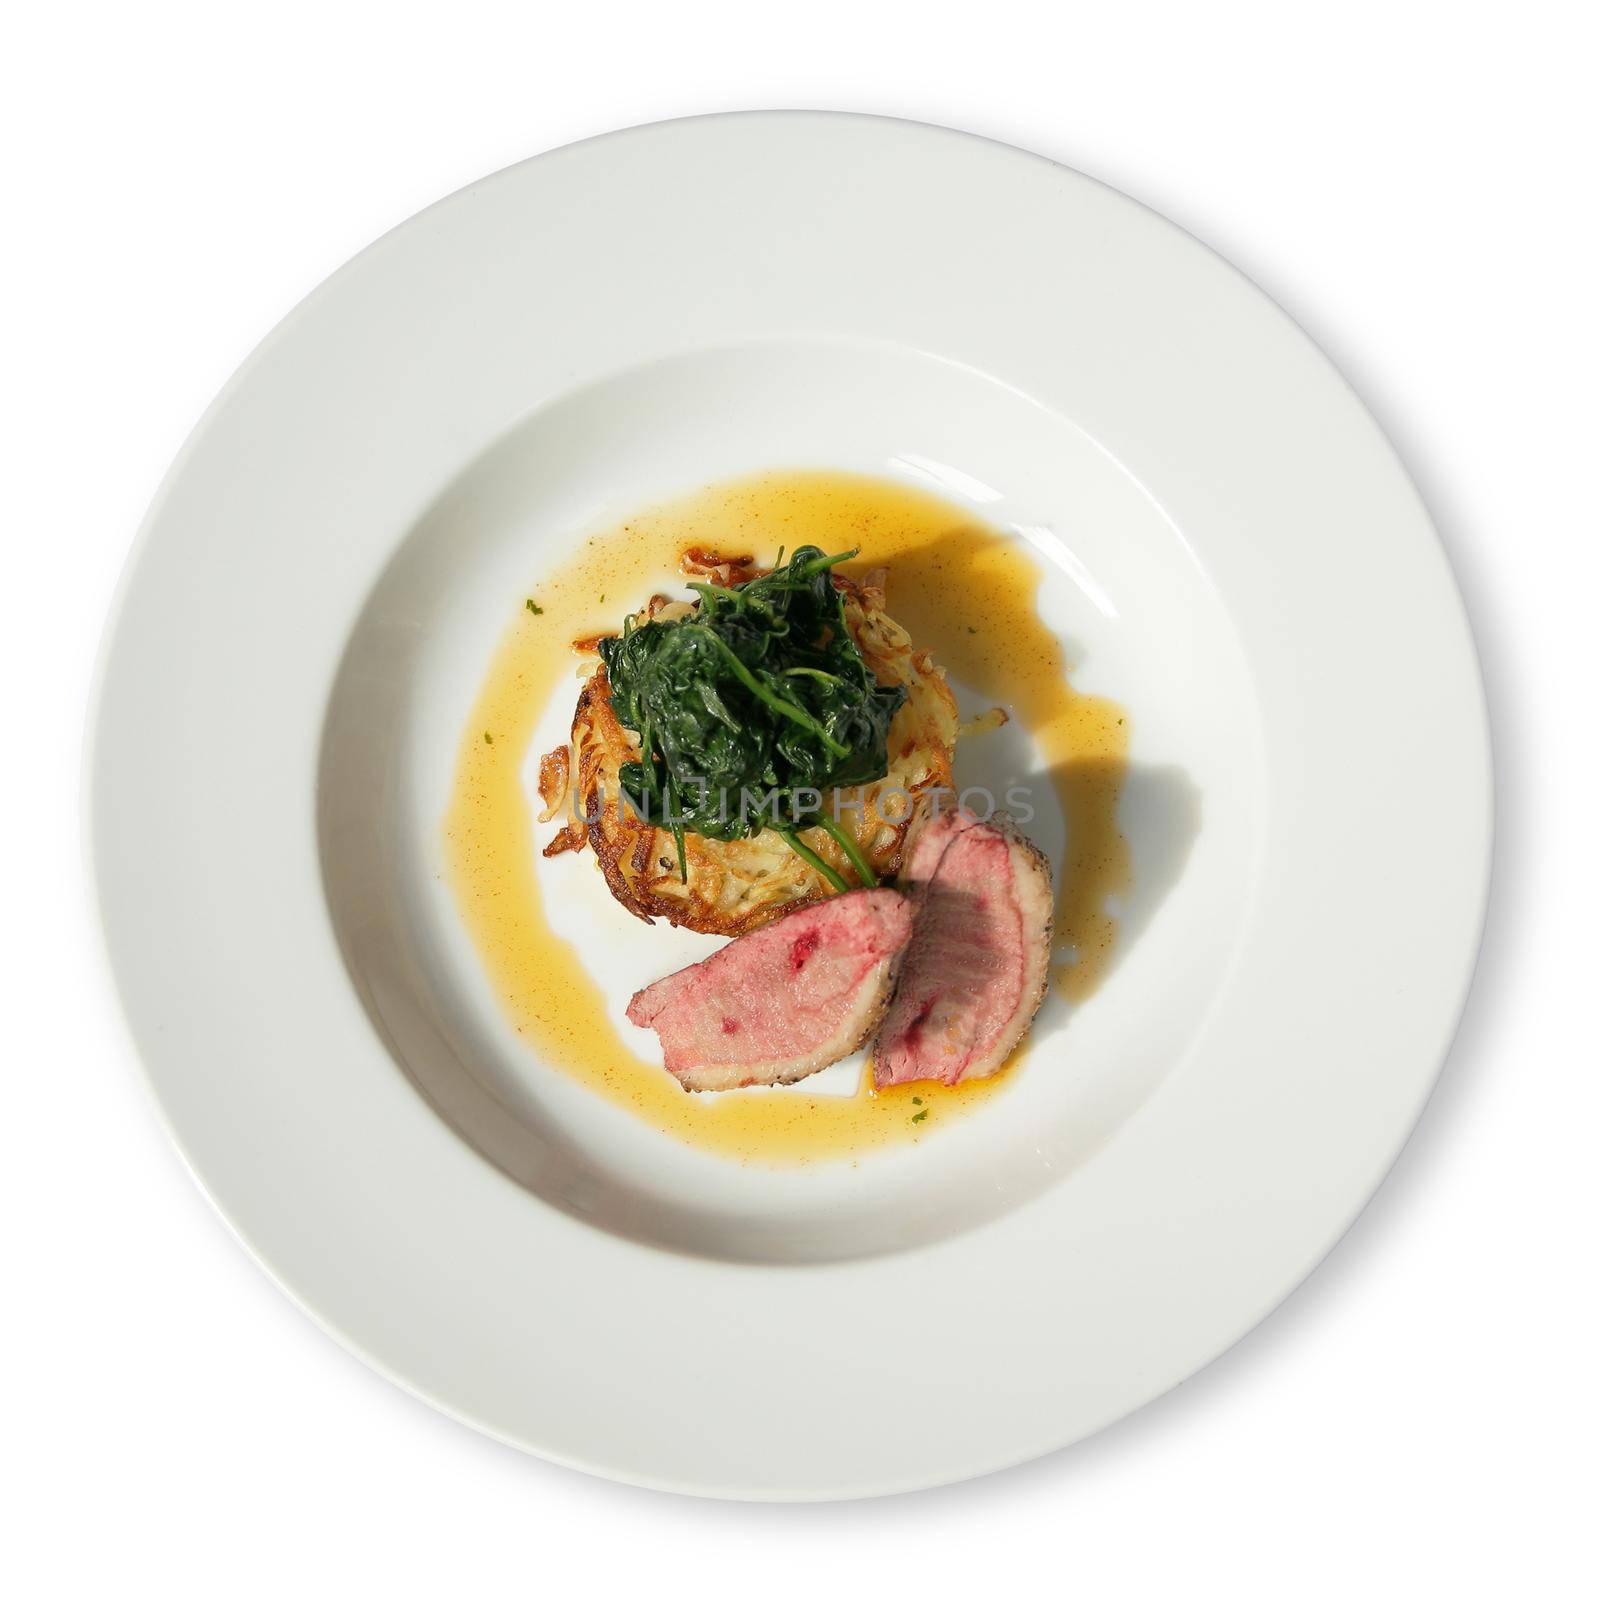 A white diner plate with lamb loin spinach and potato rosti